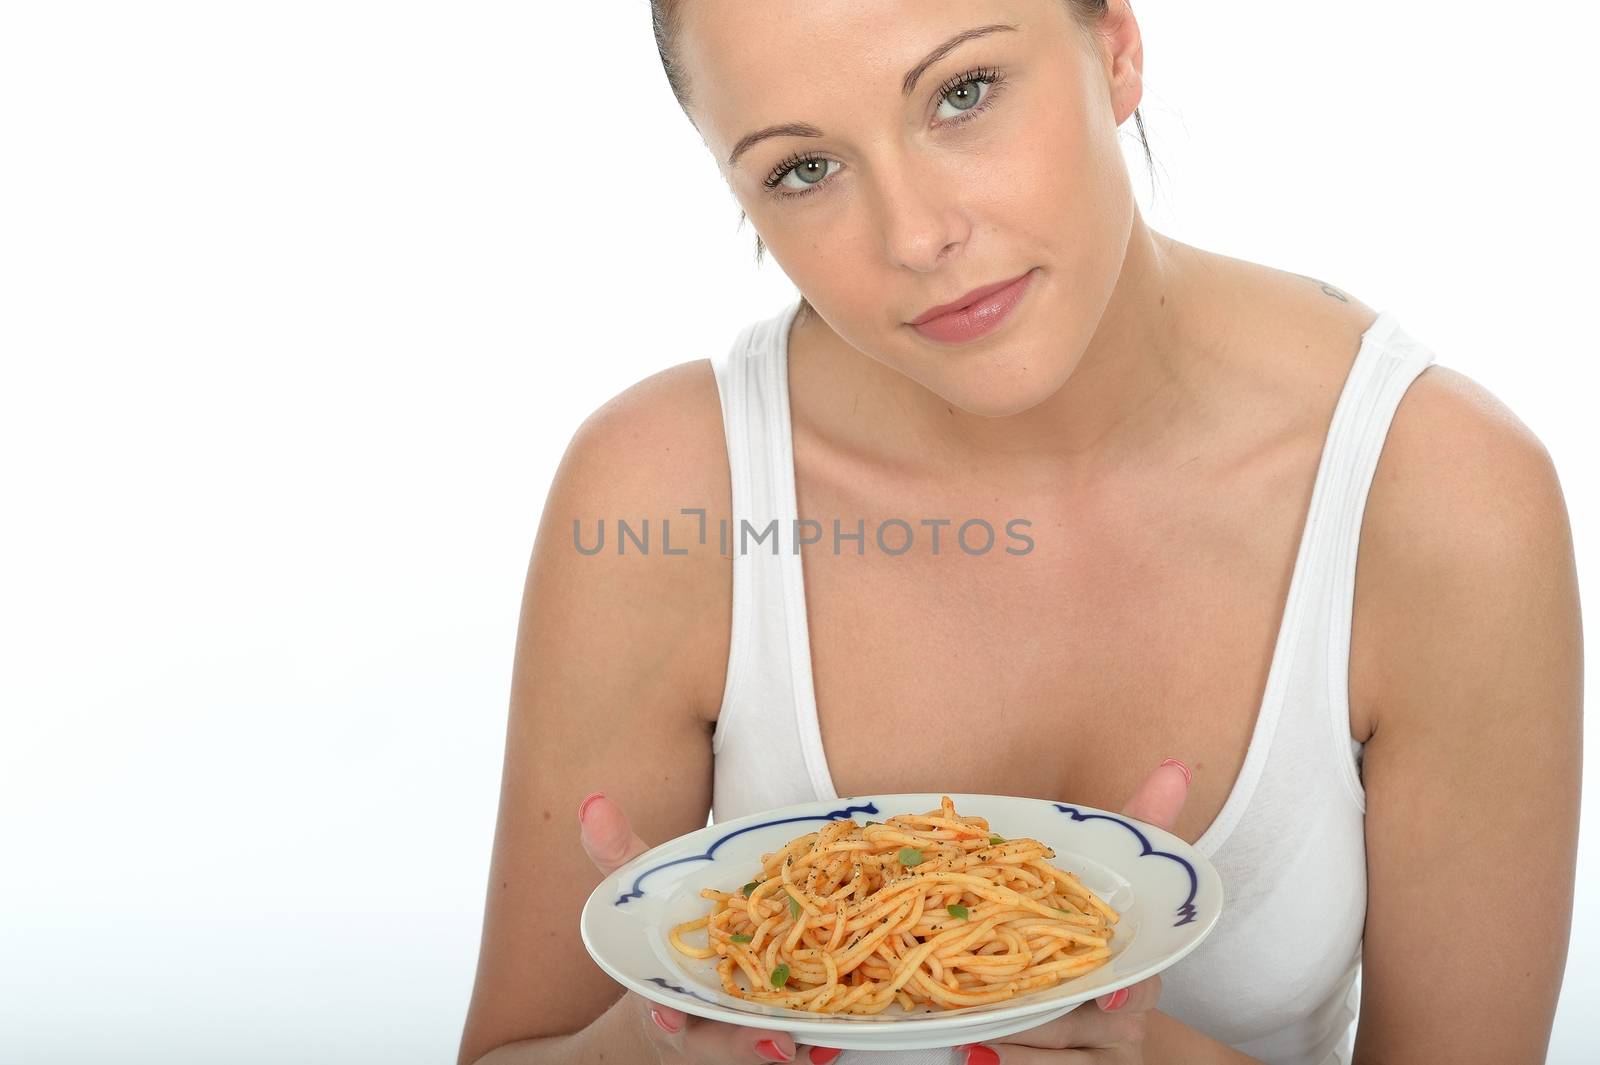 Attractive Healthy Young Woman Holding a Plate of Spaghetti by Whiteboxmedia